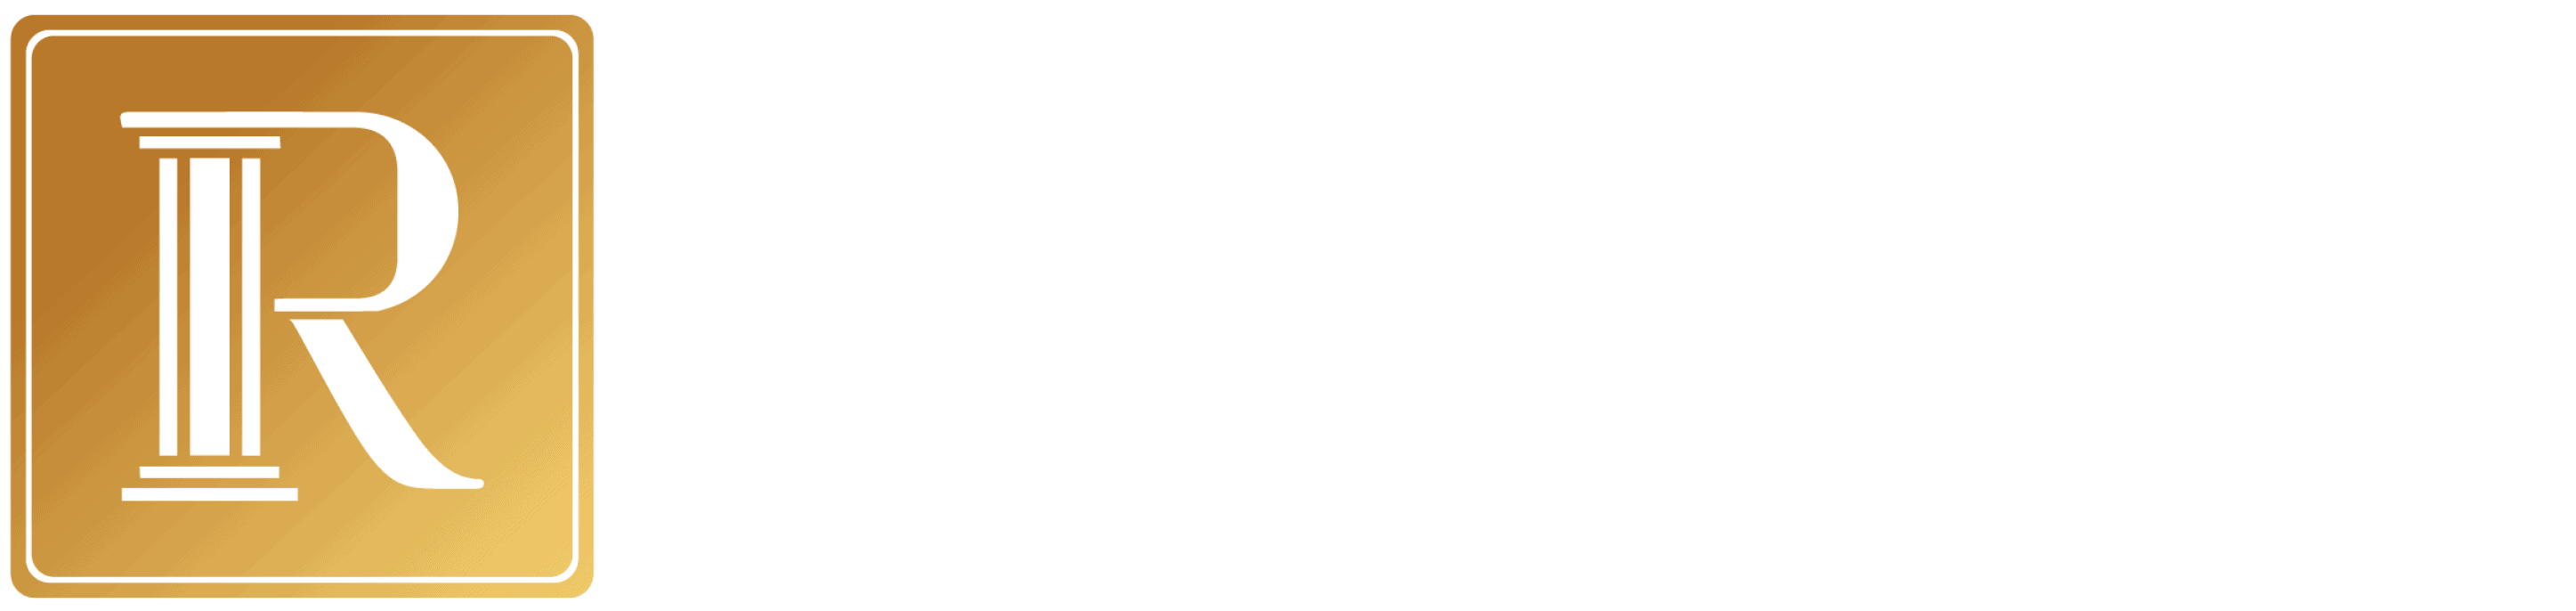 The Riley Divorce & Family Law Firm logo